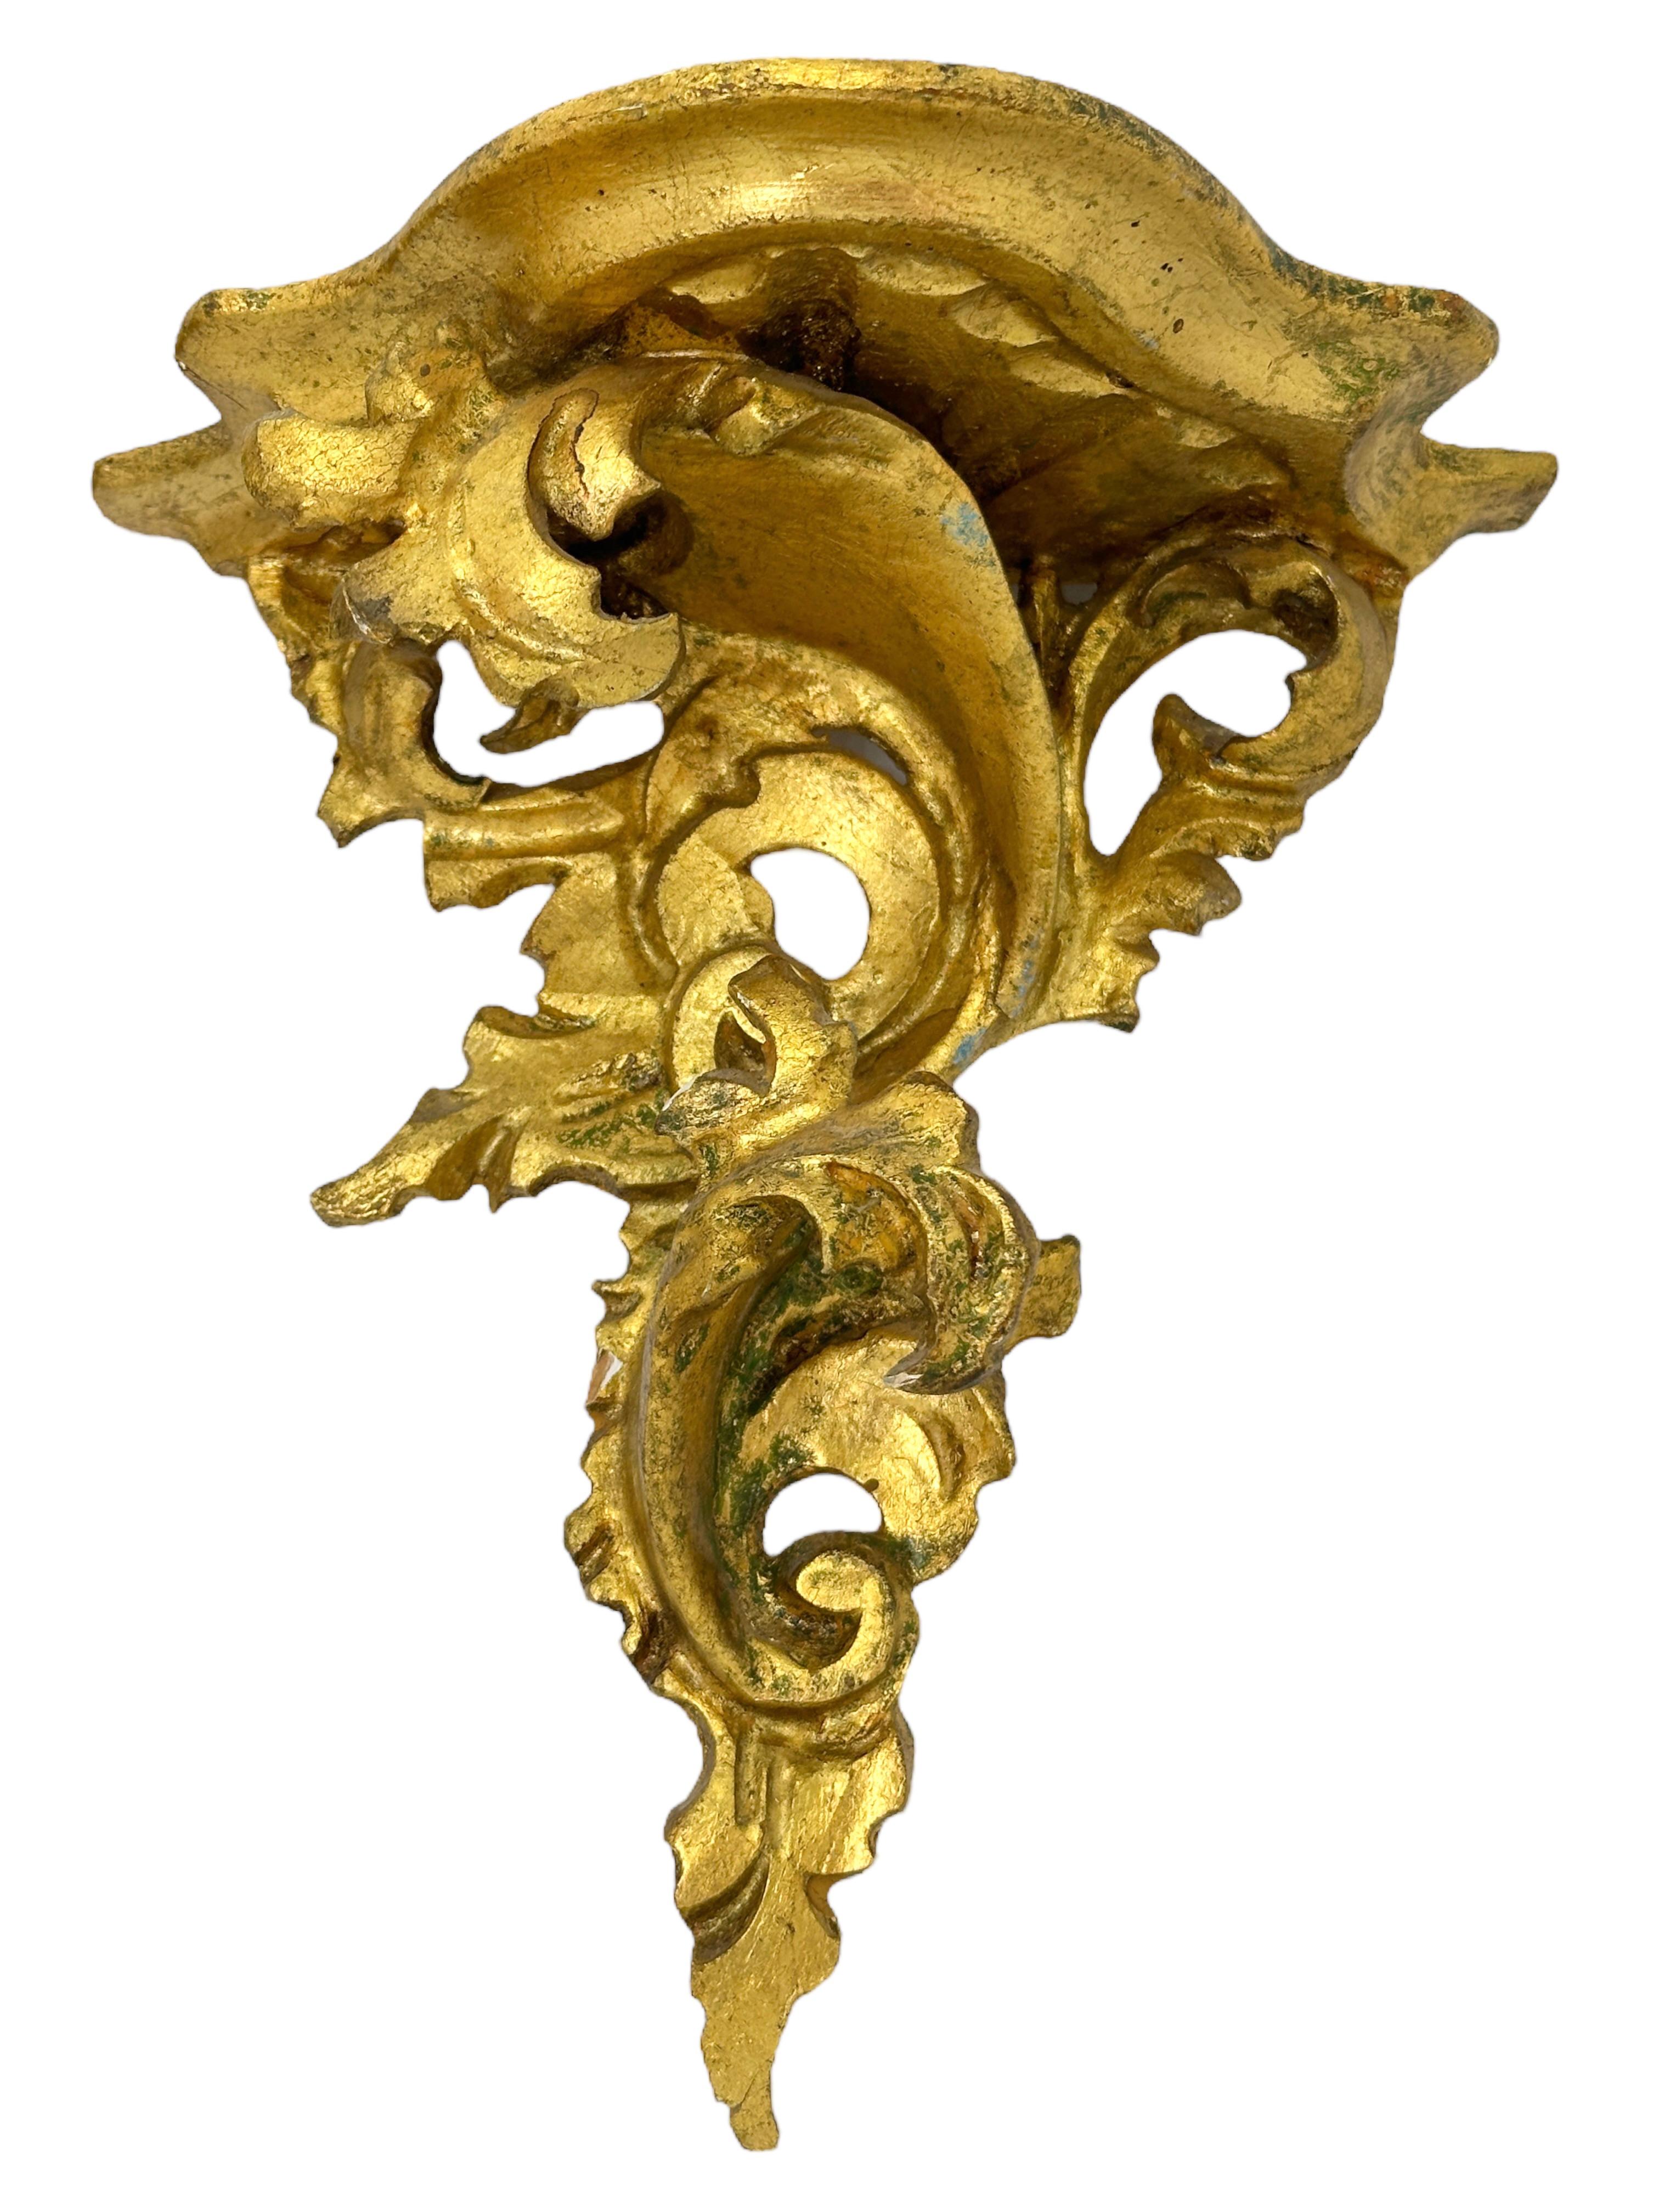 Mid-20th Century Pair of Italian Old Venetian Wall Shelf, Gilded Carved Acanthus, Rococo Style For Sale